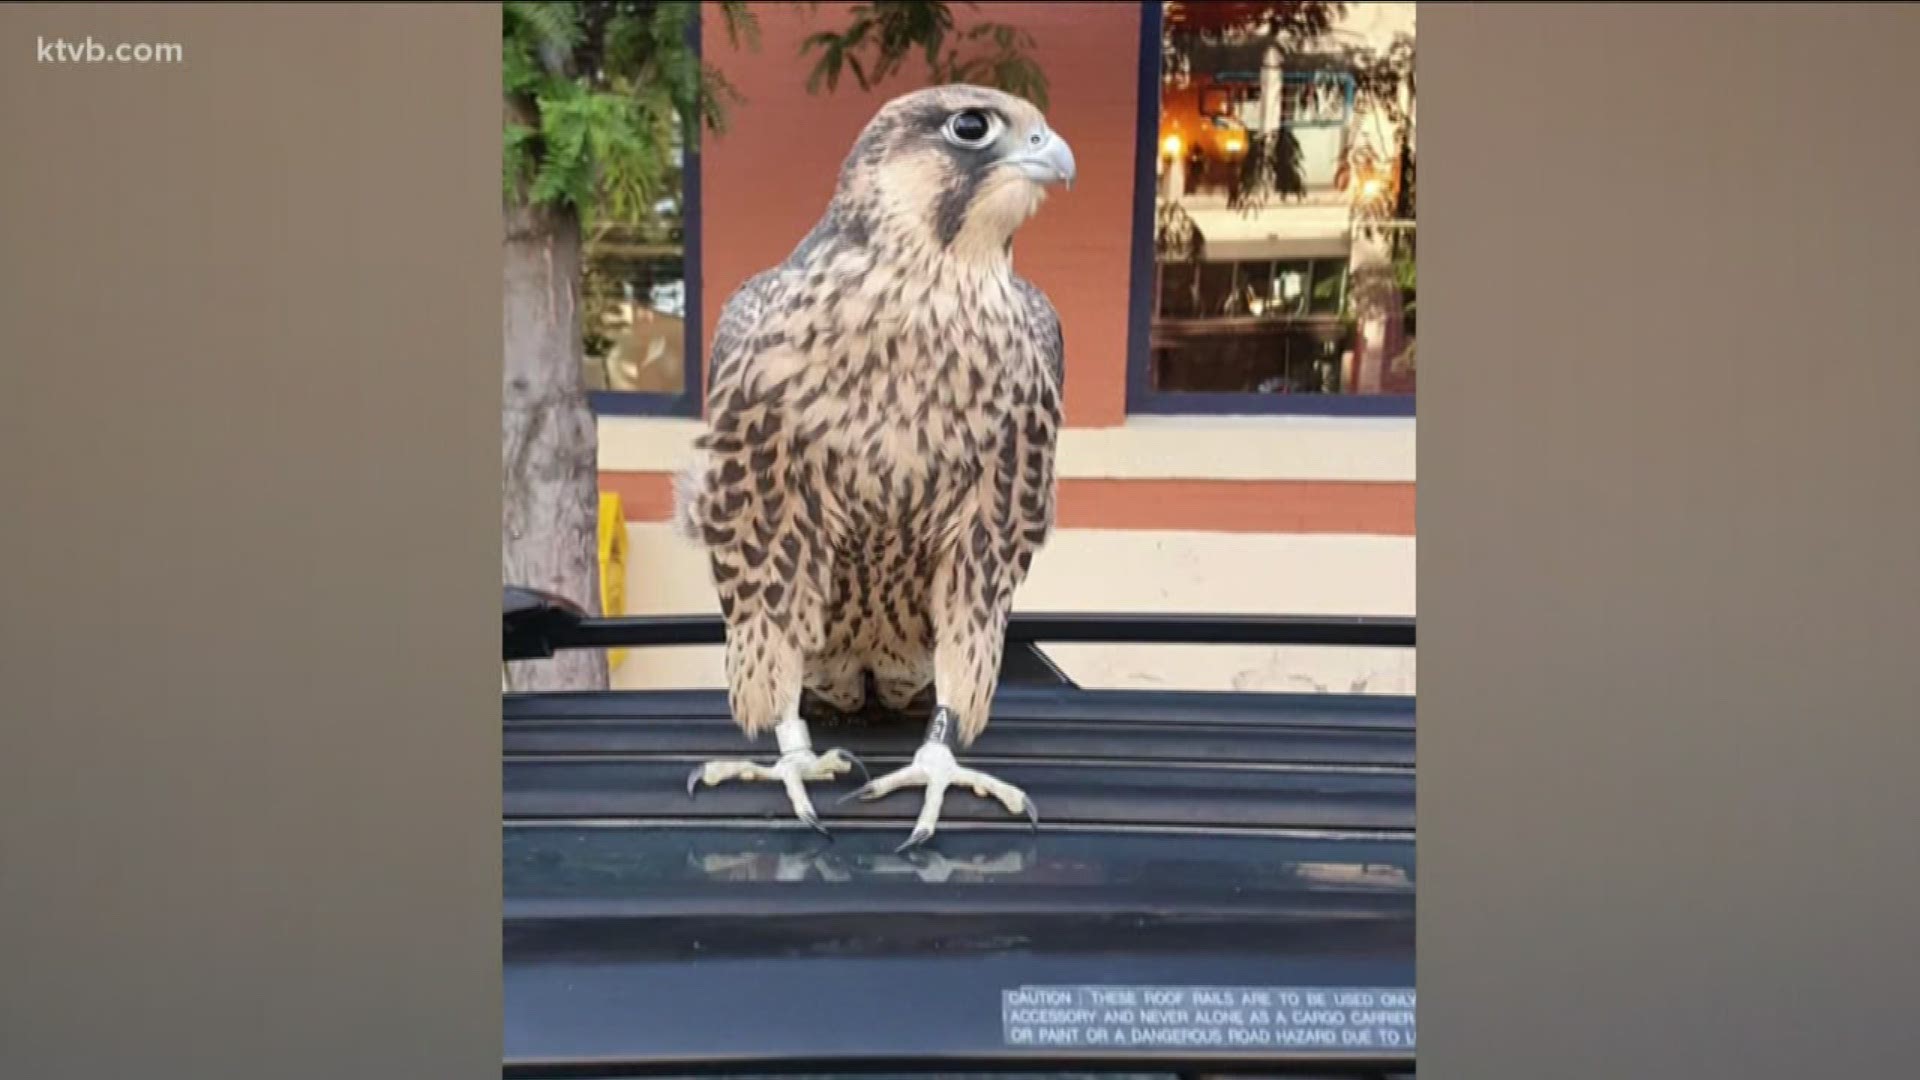 Jenny Byrne shared photos of the large bird hanging out on her car.